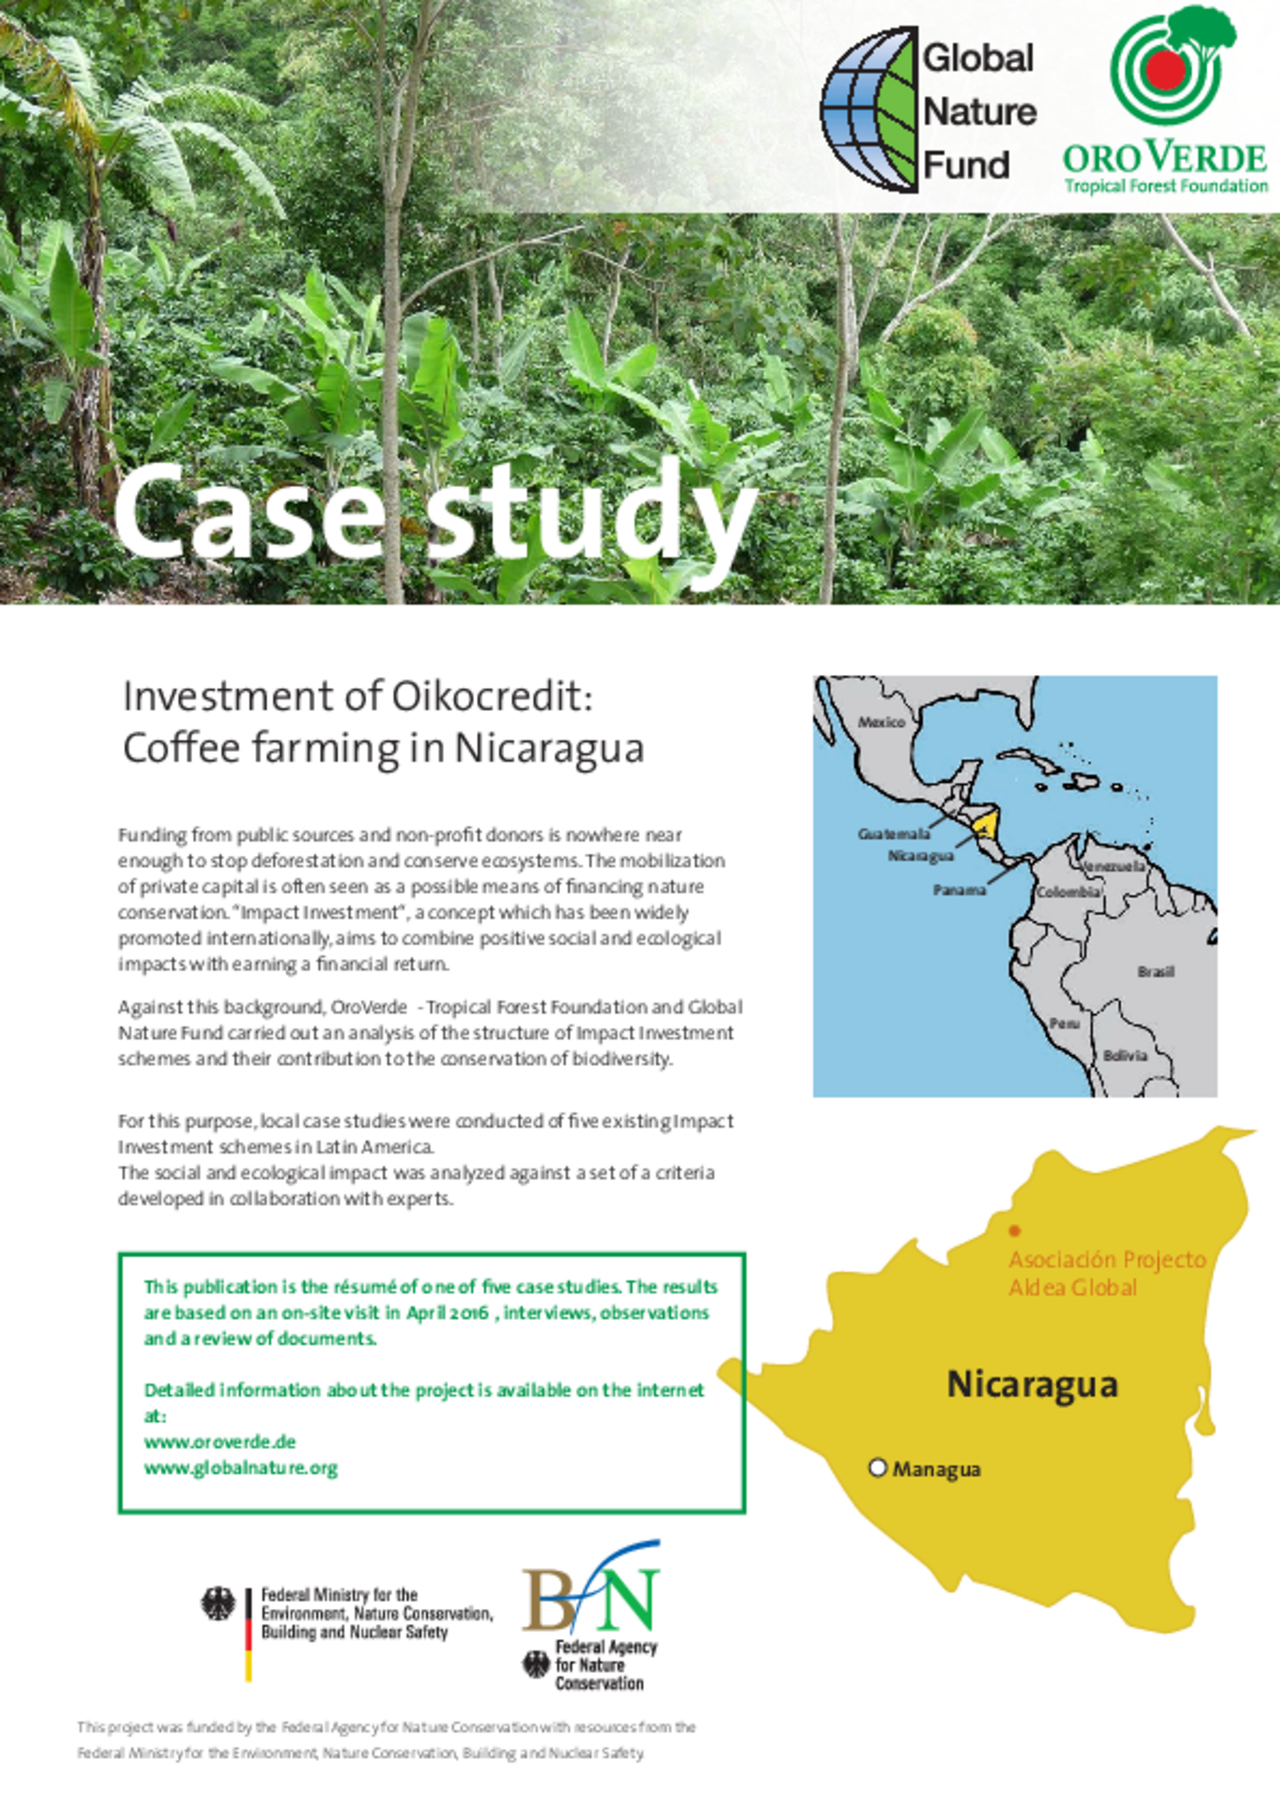 Case study: Agroforestry in Nicaragua